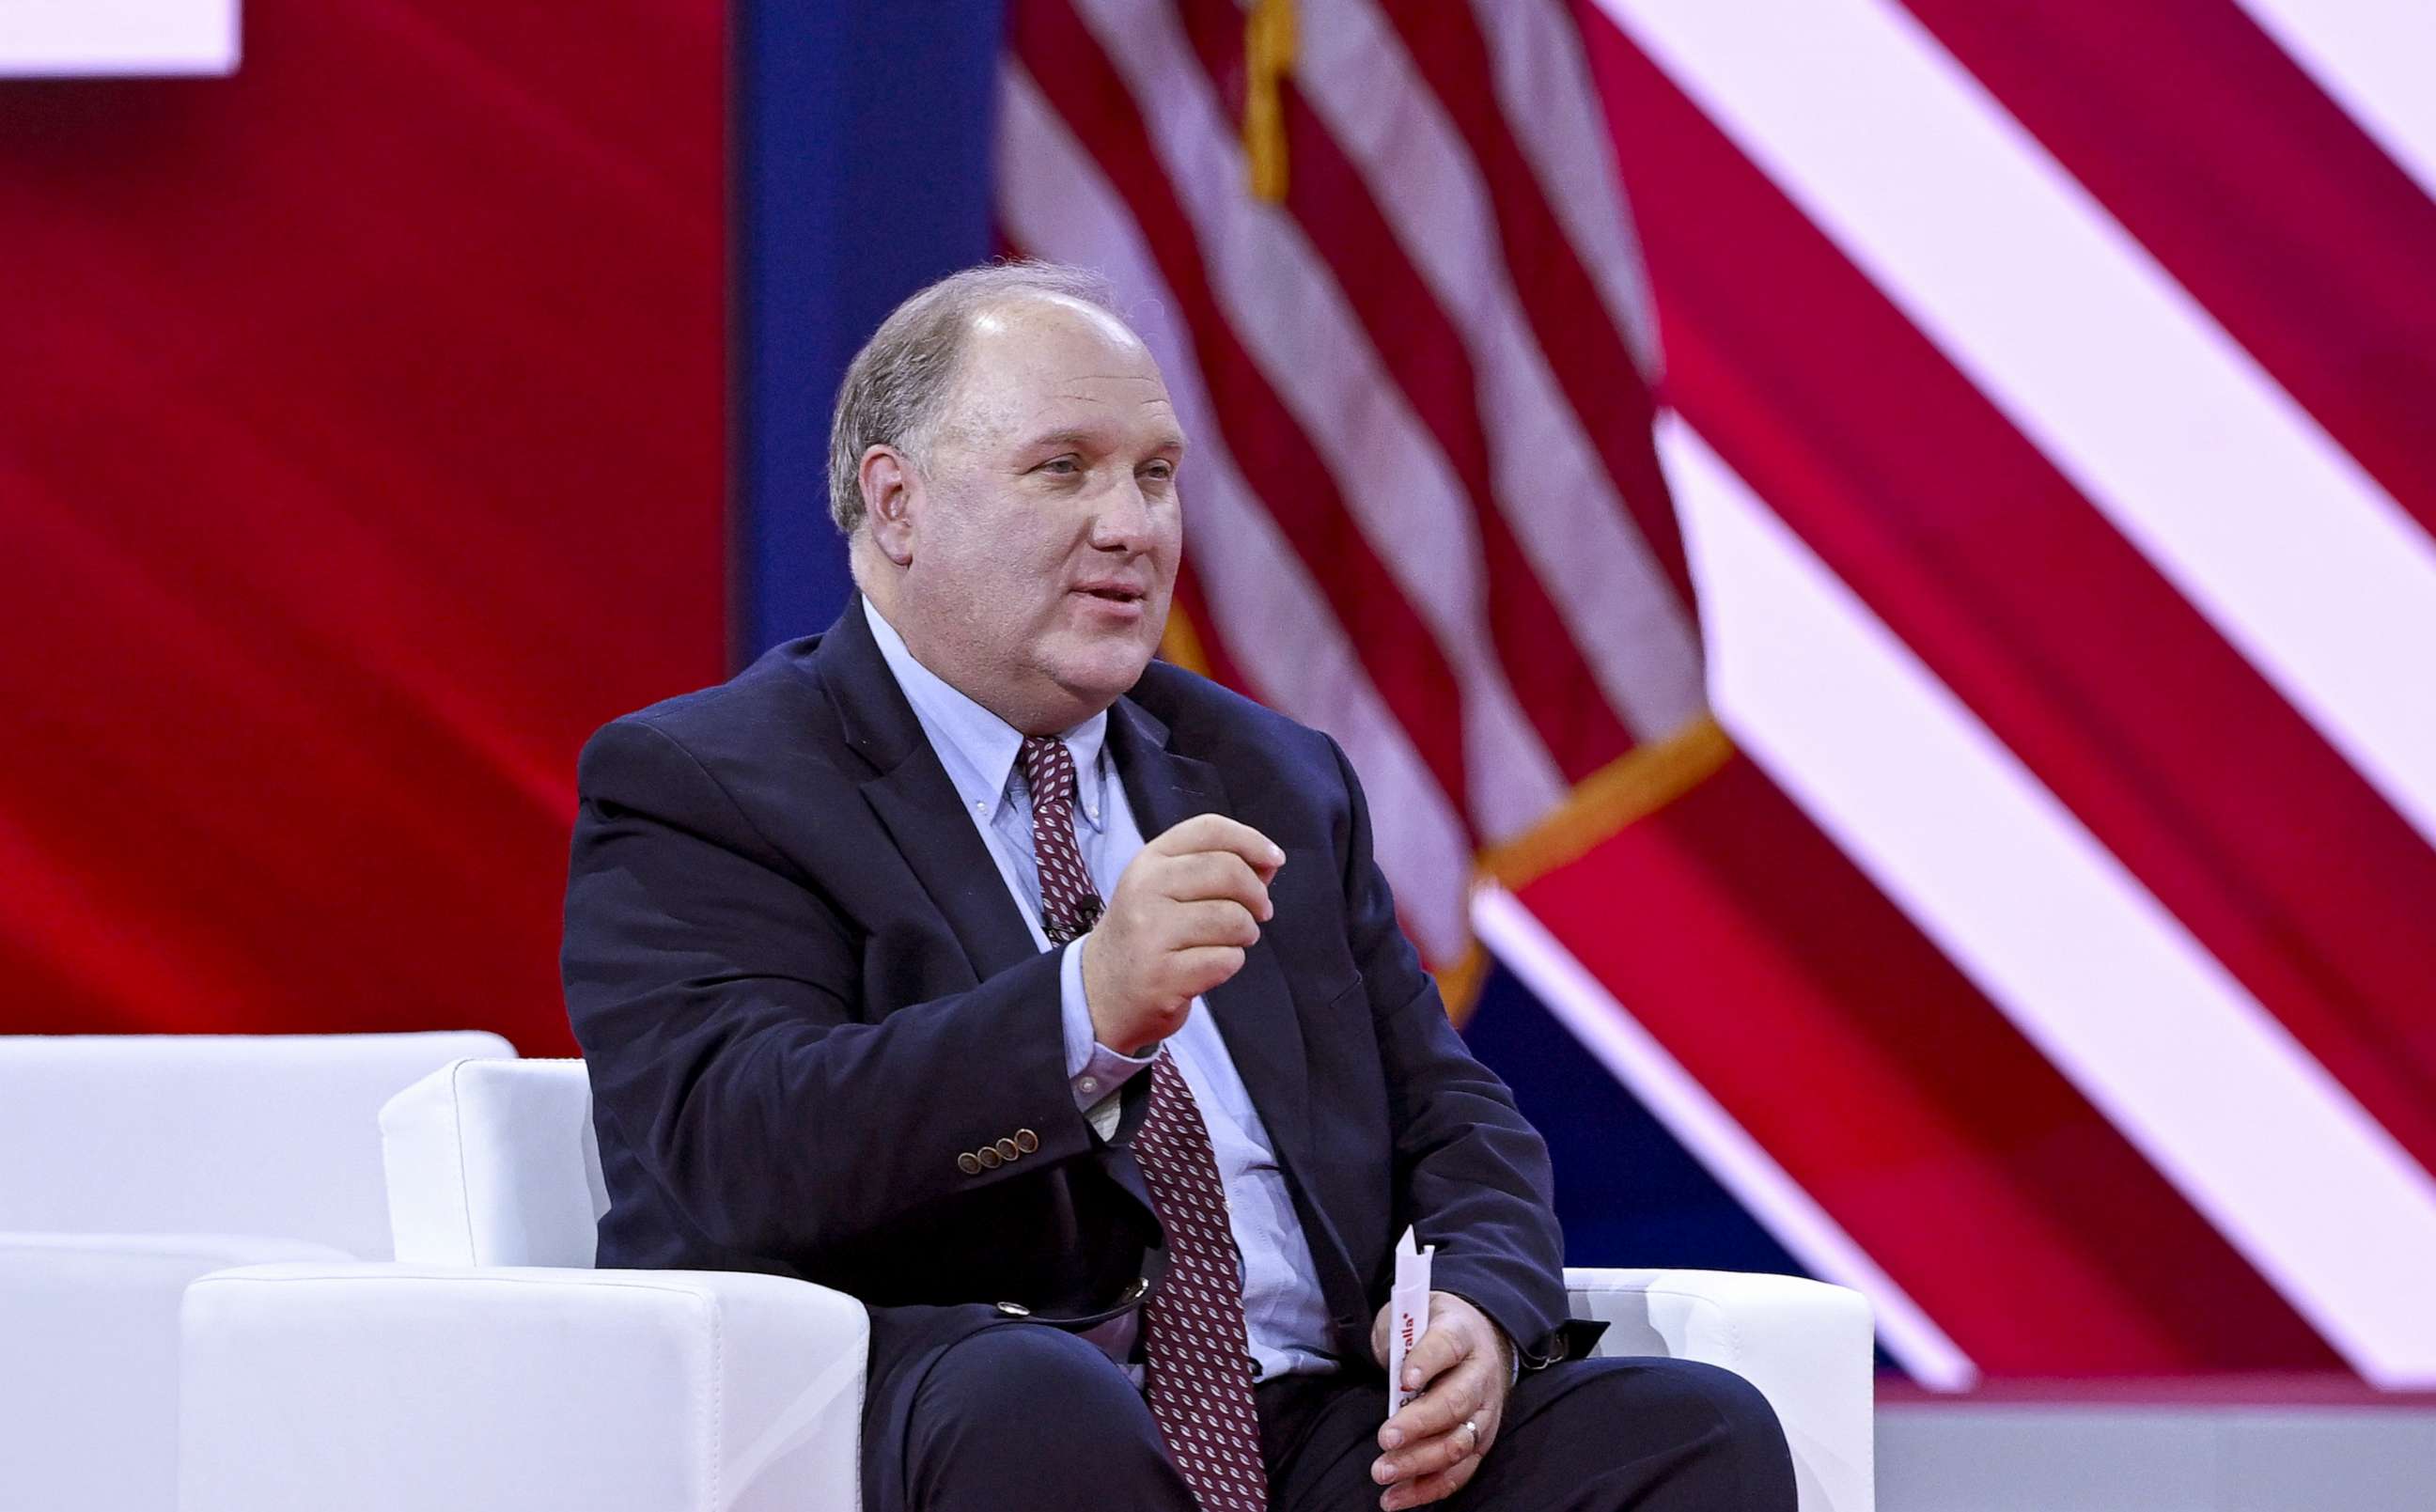 PHOTO: Journalist John Solomon delivers remarks as he attends the 2023 Conservative Political Action Conference (CPAC) at the Gaylord National Resort and Convention Center in National Harbor, Md., March 4, 2023.